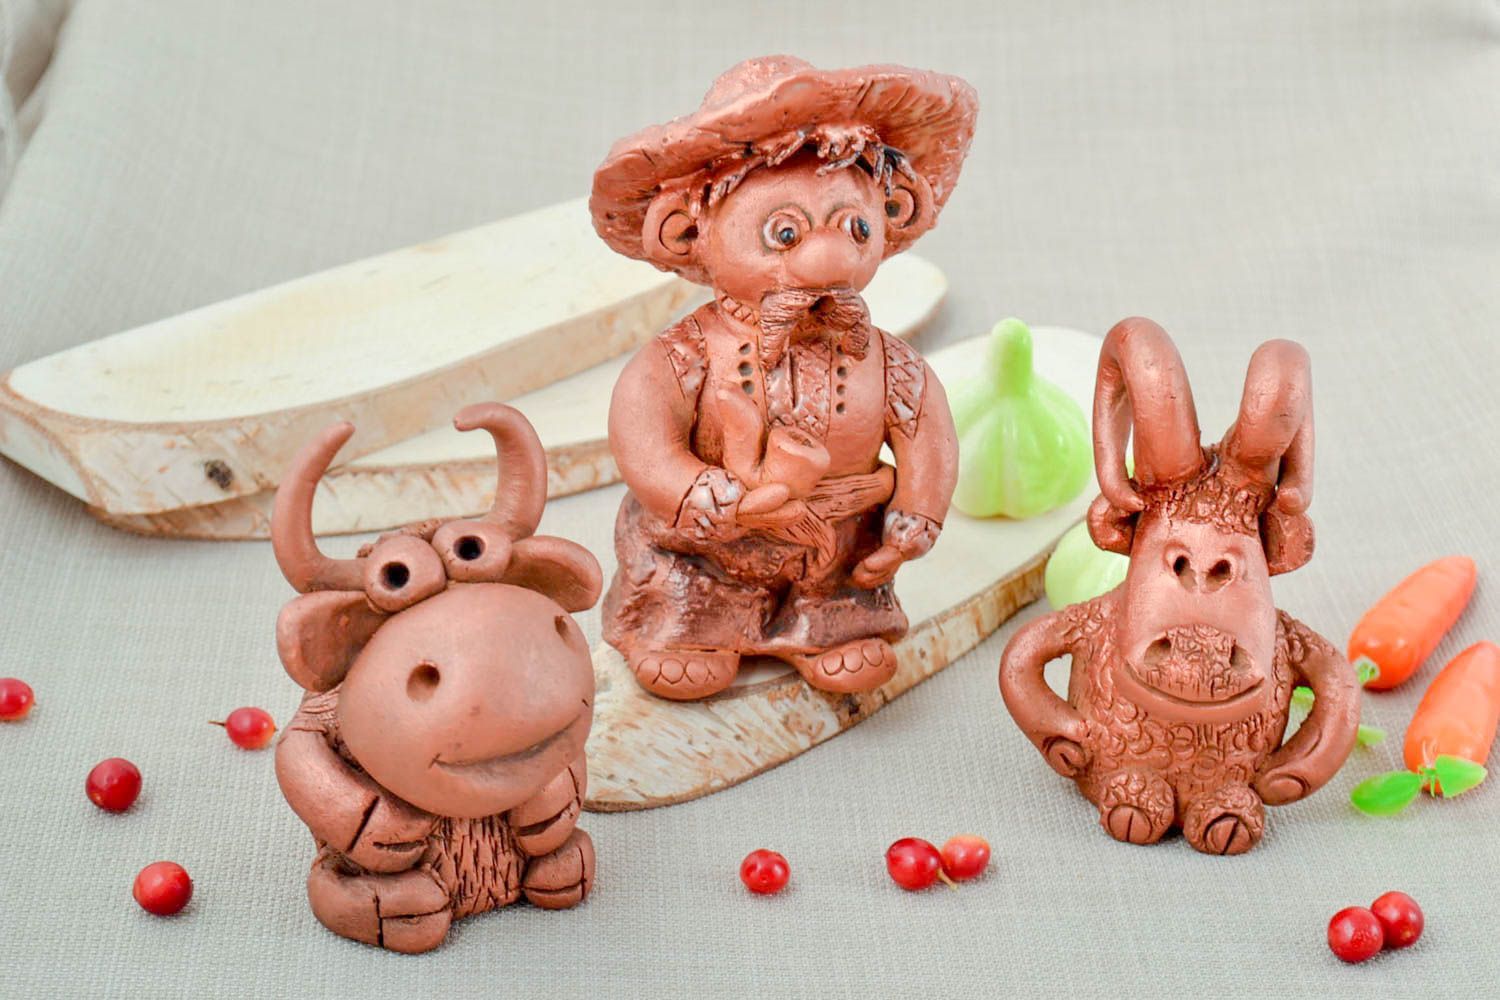 Handmade collectible figurines table decor 3 miniature figurines gifts for kids photo 1